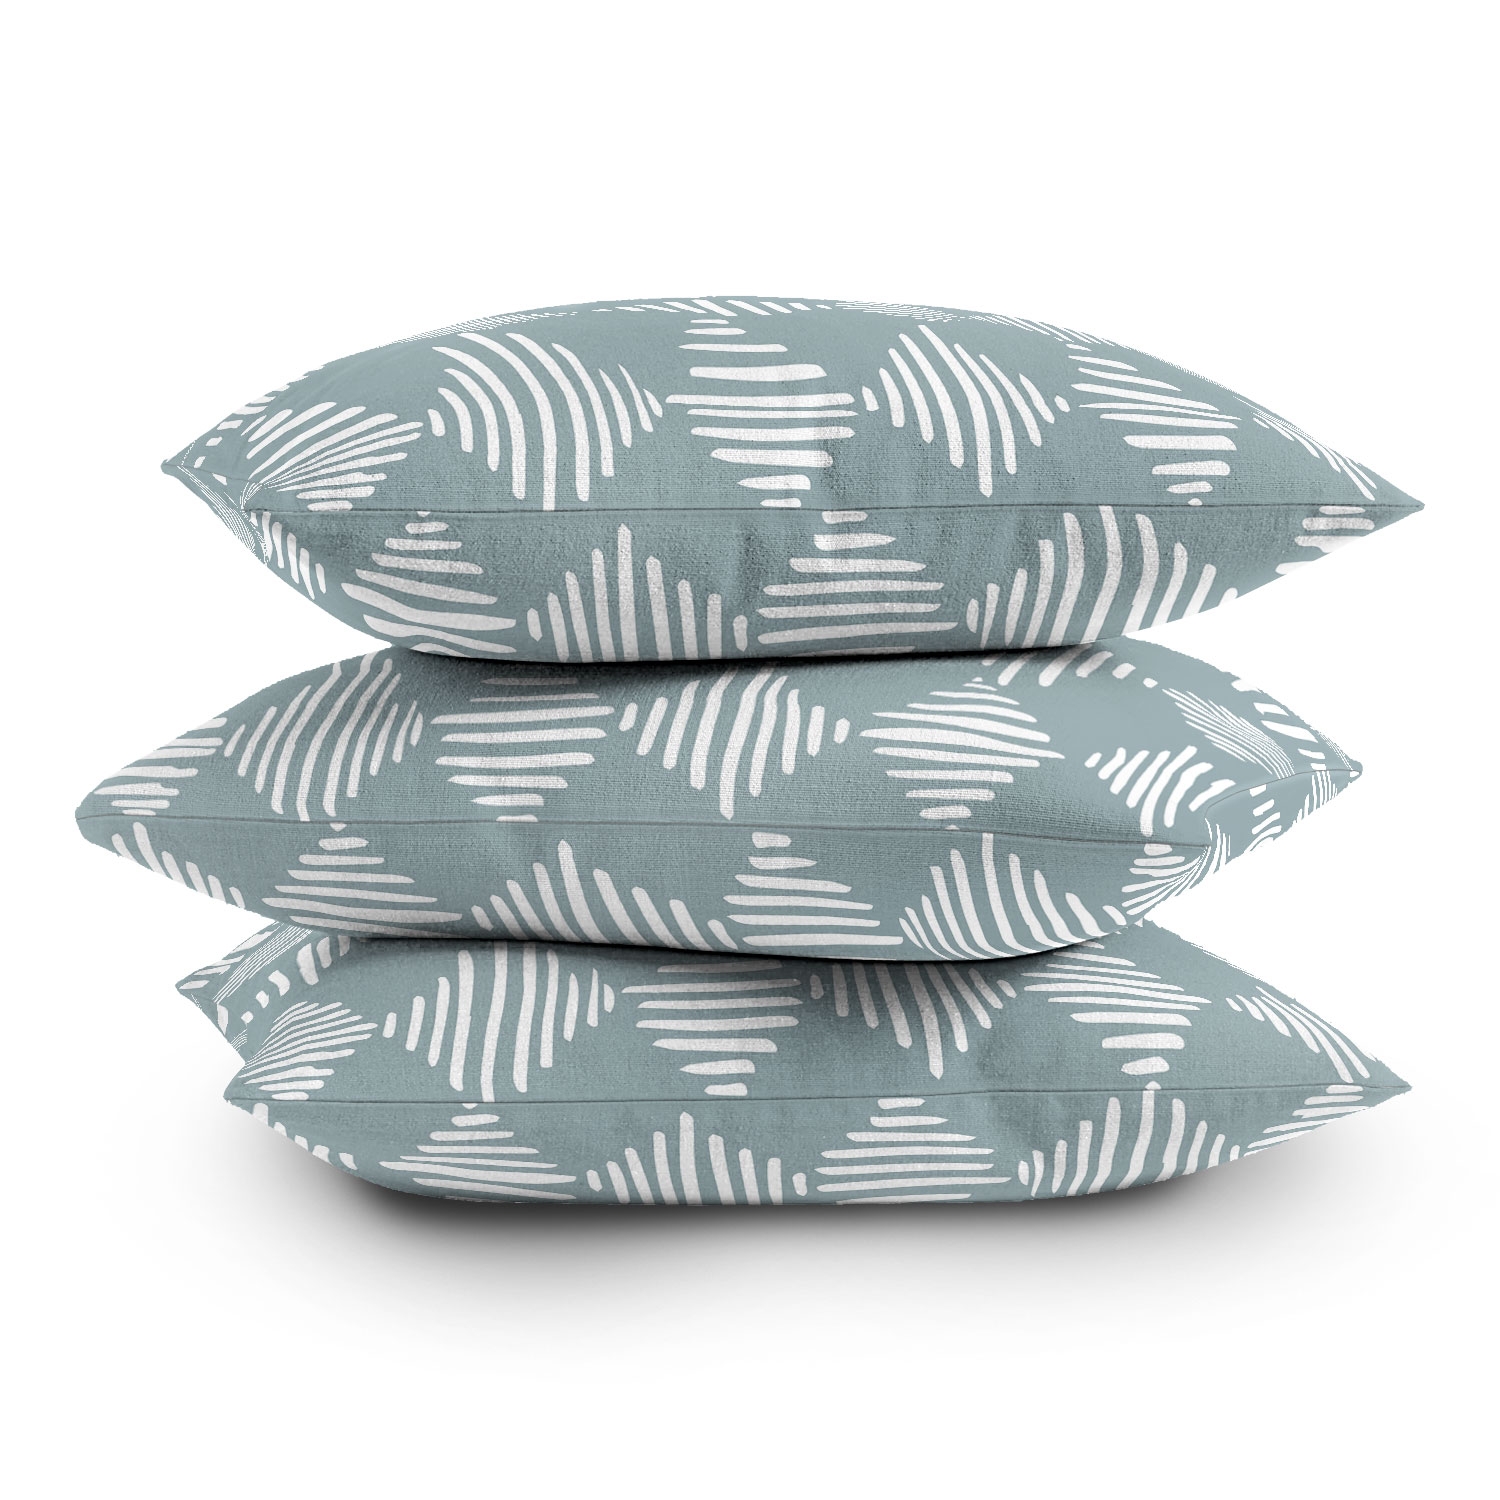 Sketches 1 by Mareike Boehmer - Outdoor Throw Pillow 26" x 26" - Image 1